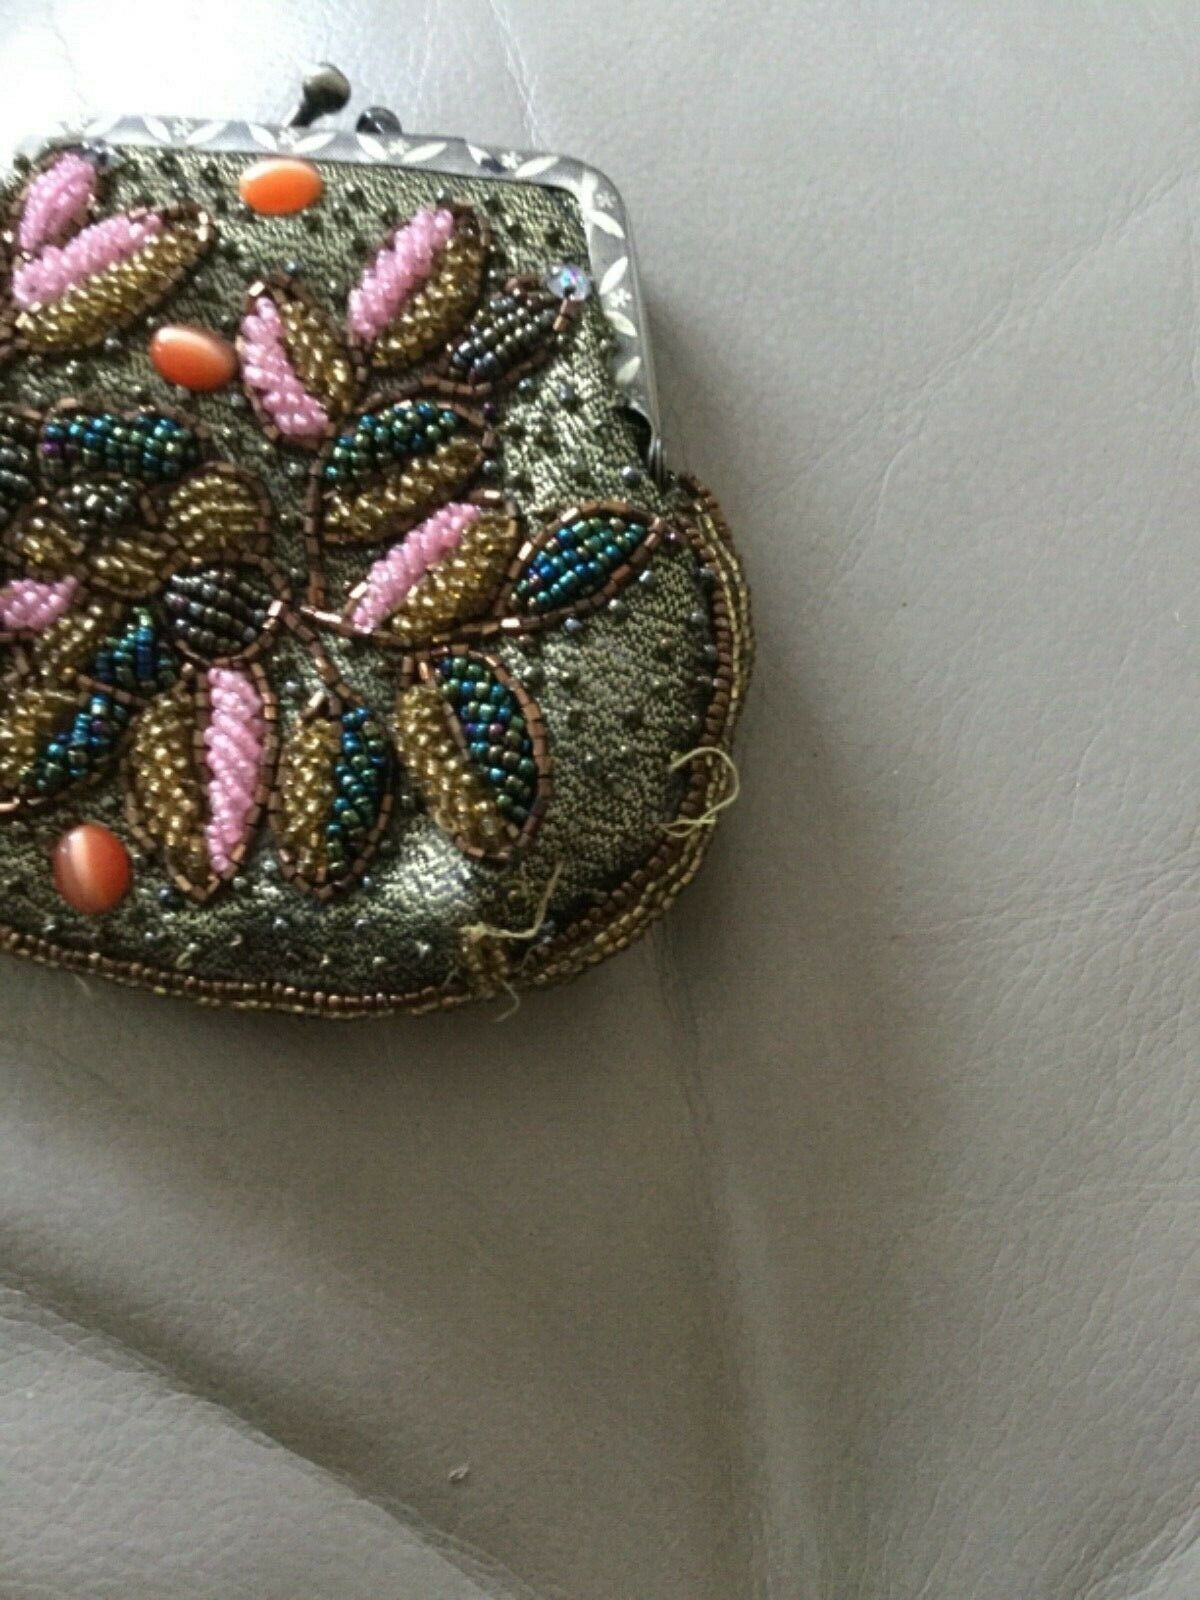 Vintage Butler and Wilson Womens Beaded Small Clutch Purse - Image 4 of 6